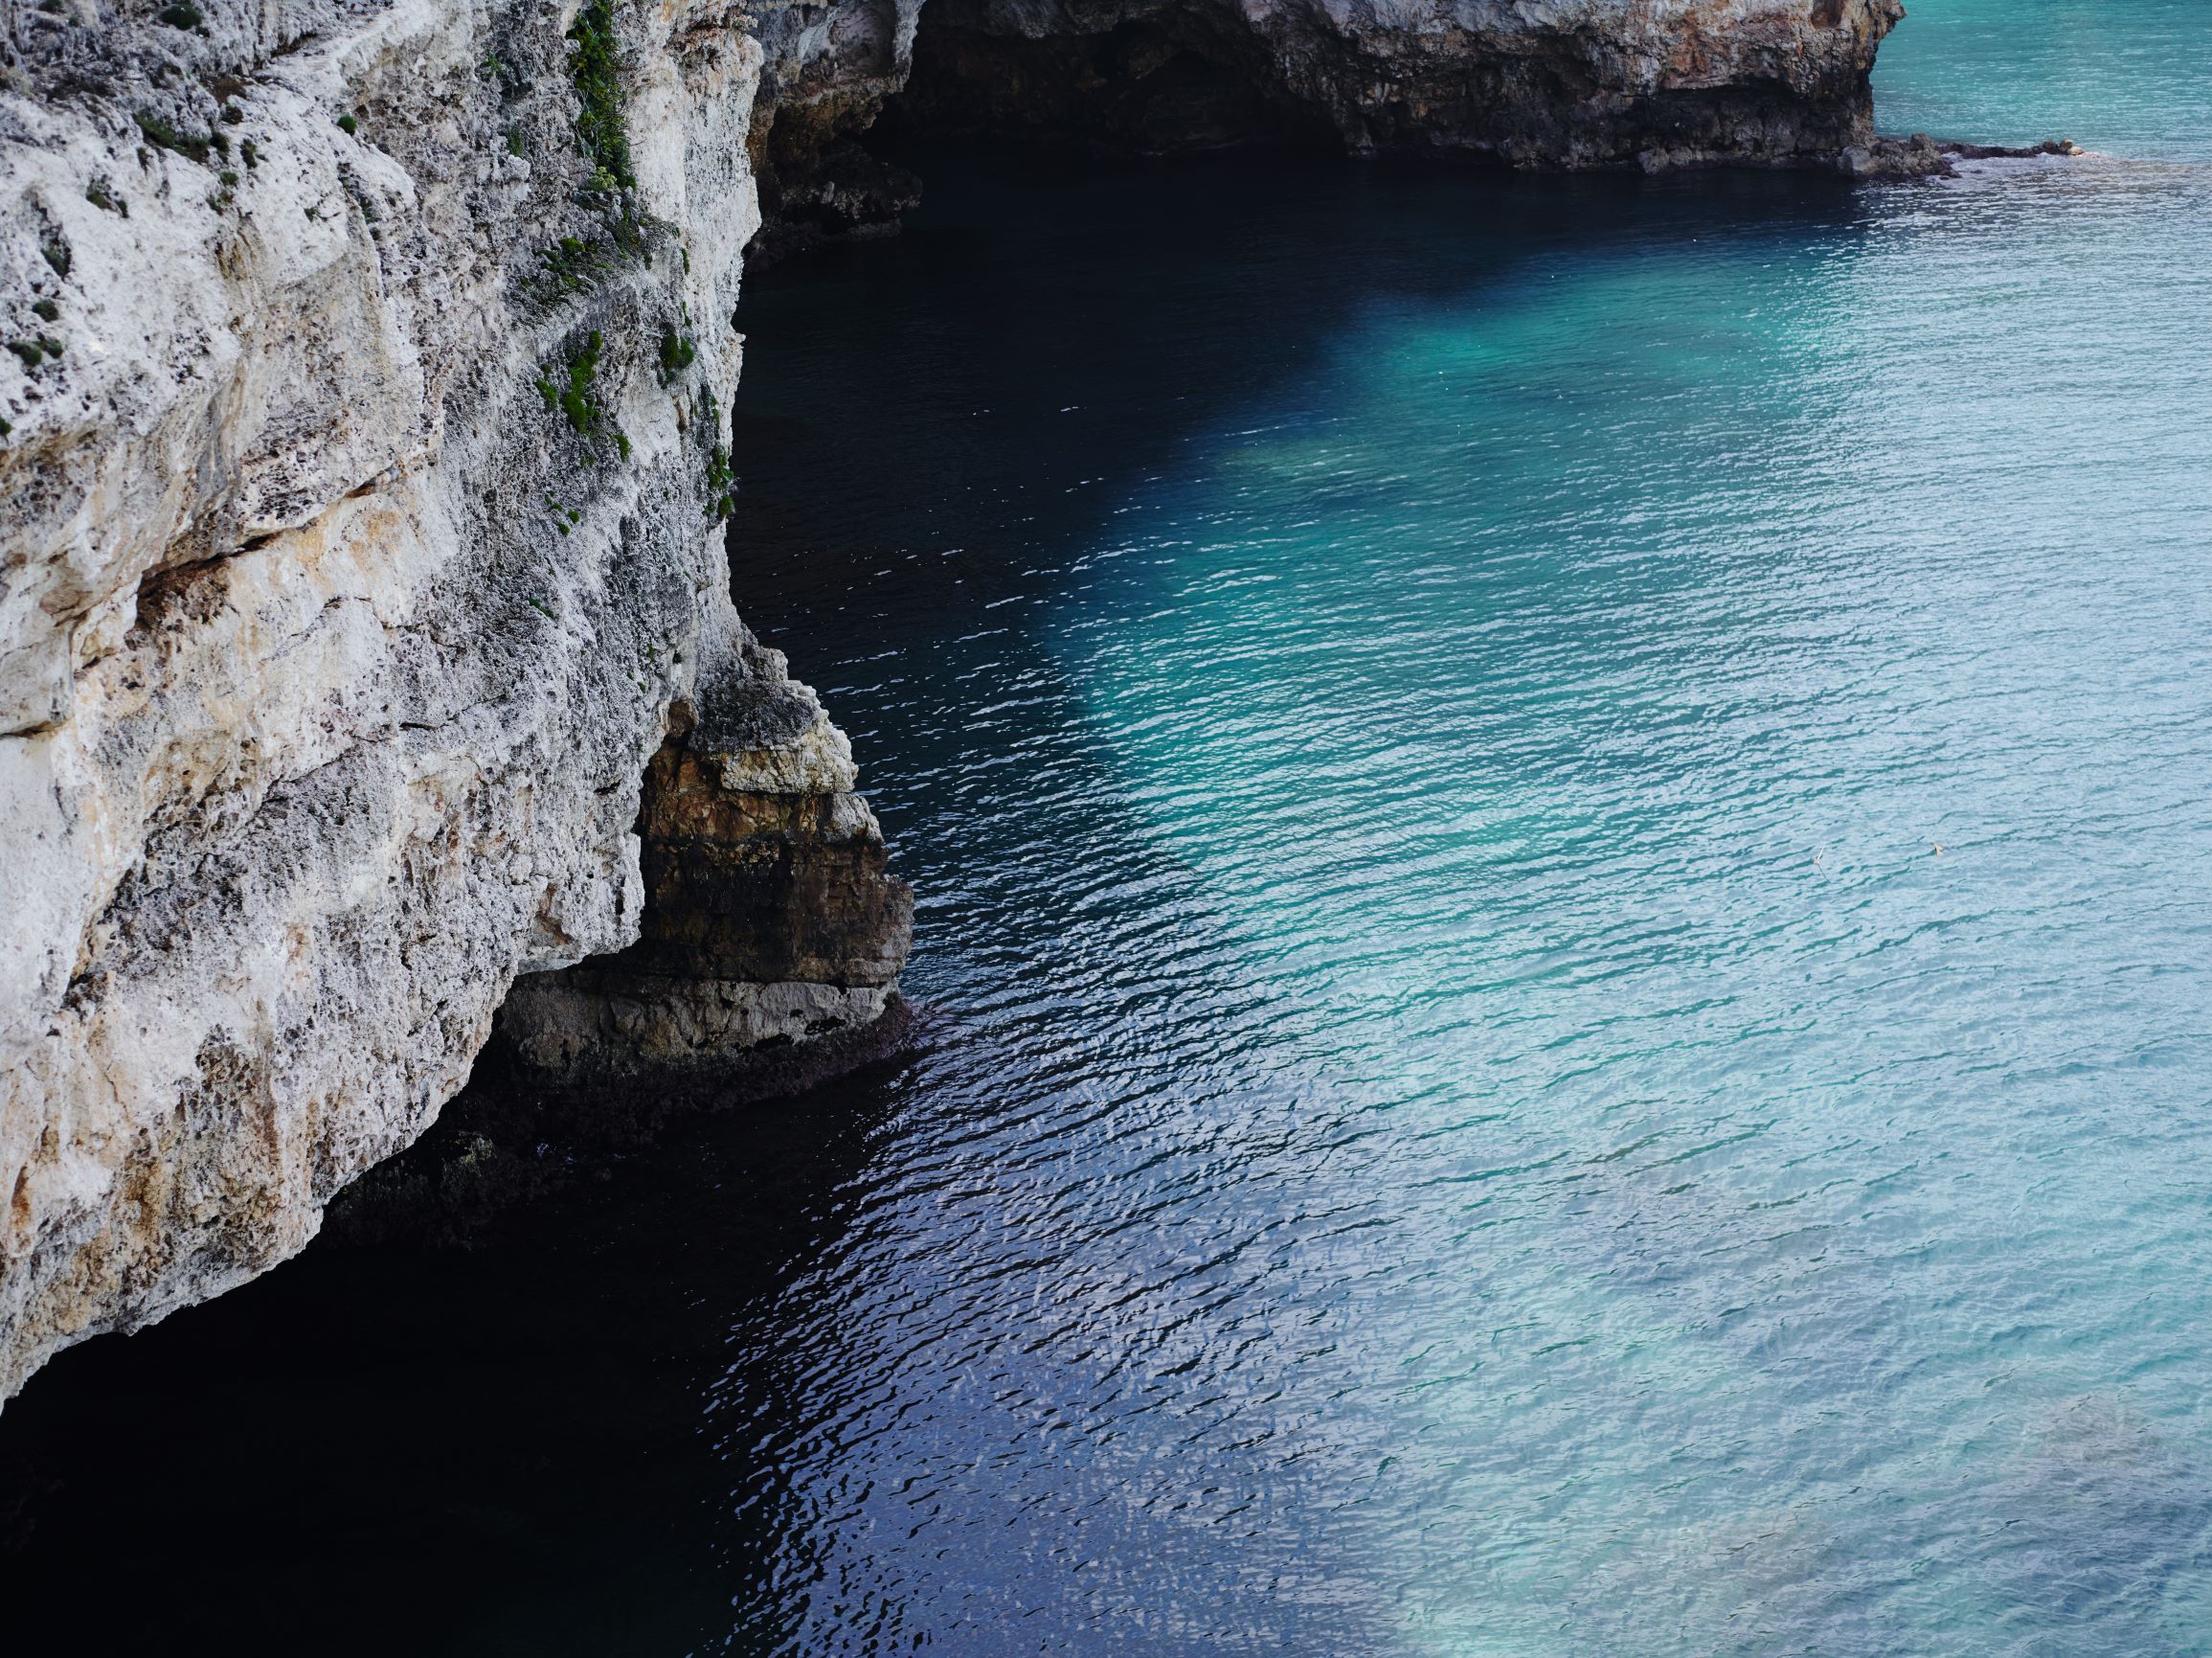 The cliffs at Bari in Puglia, southern Italy. As featured in our book Puglia